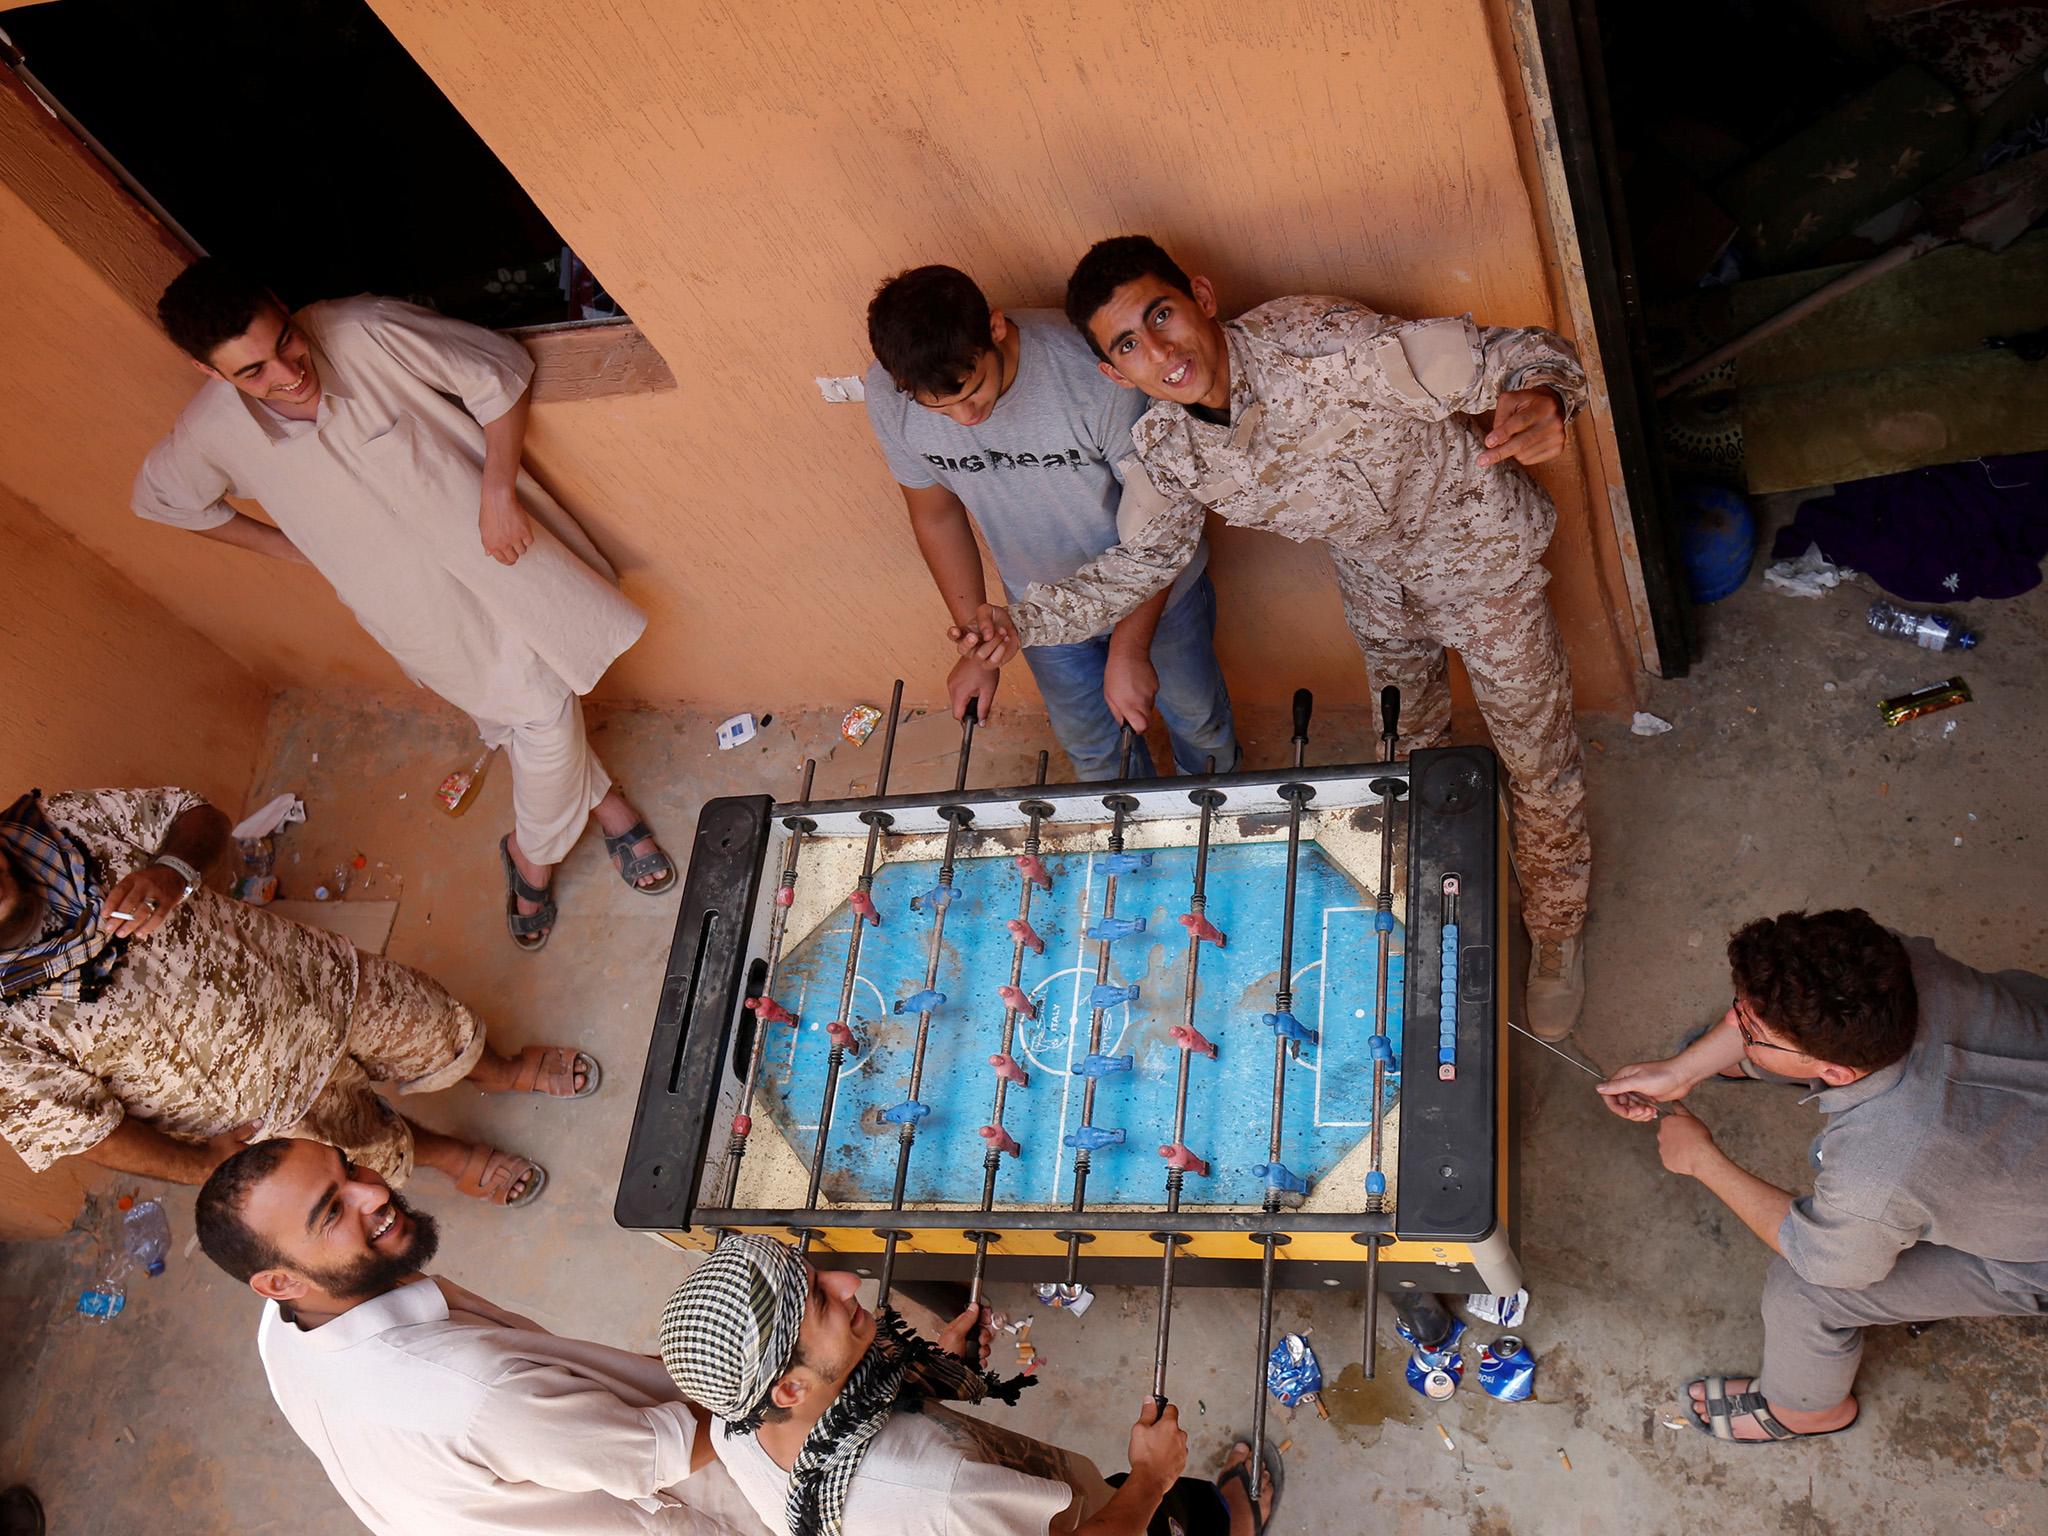 Some of the Libyan forces getting in a game of table football